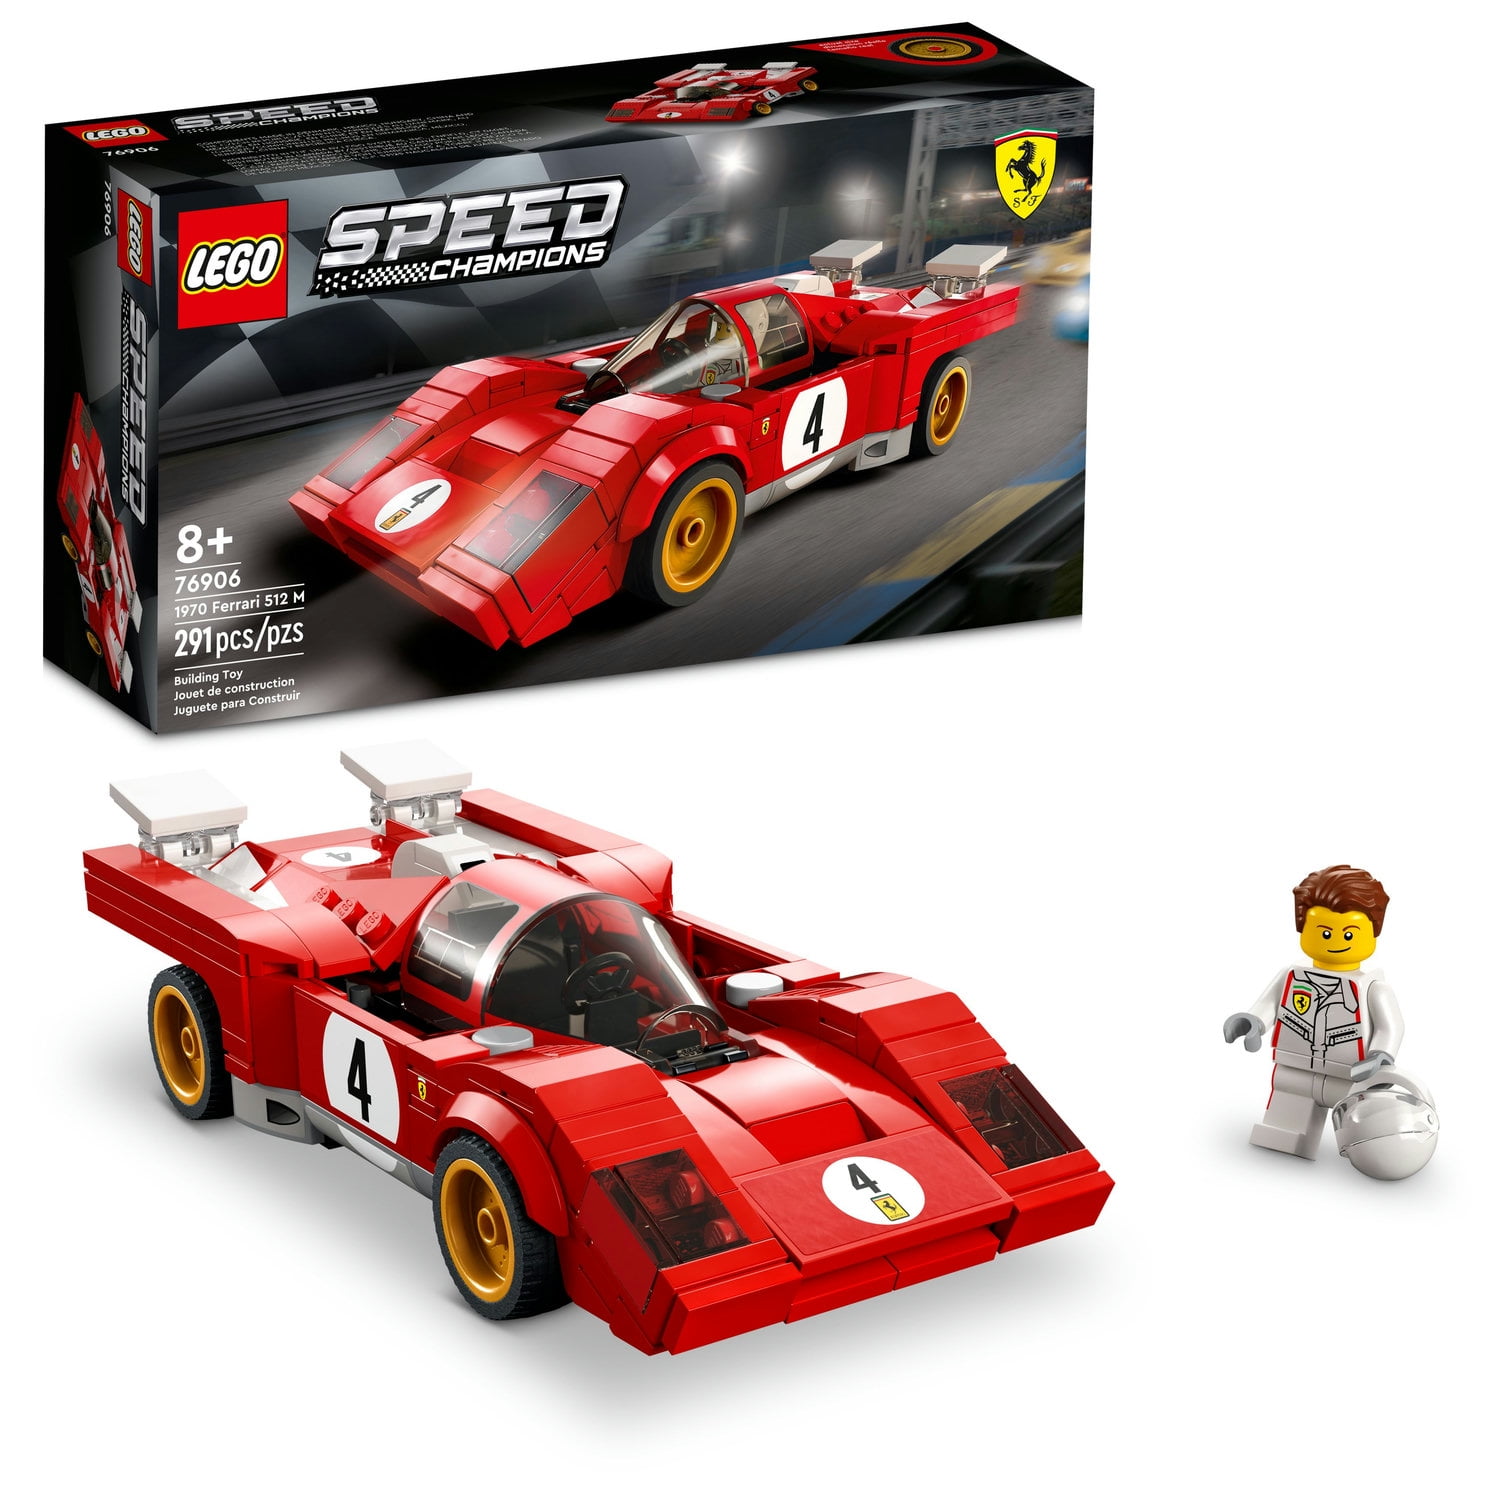 LEGO Speed Champions 1970 Ferrari 512 M 76906 Toy Building Kit; Collectible Recreation of an Iconic Race car for Kids Aged 8+; Includes a Driver Minifigure with a Cool Racing Suit (291 Pieces)